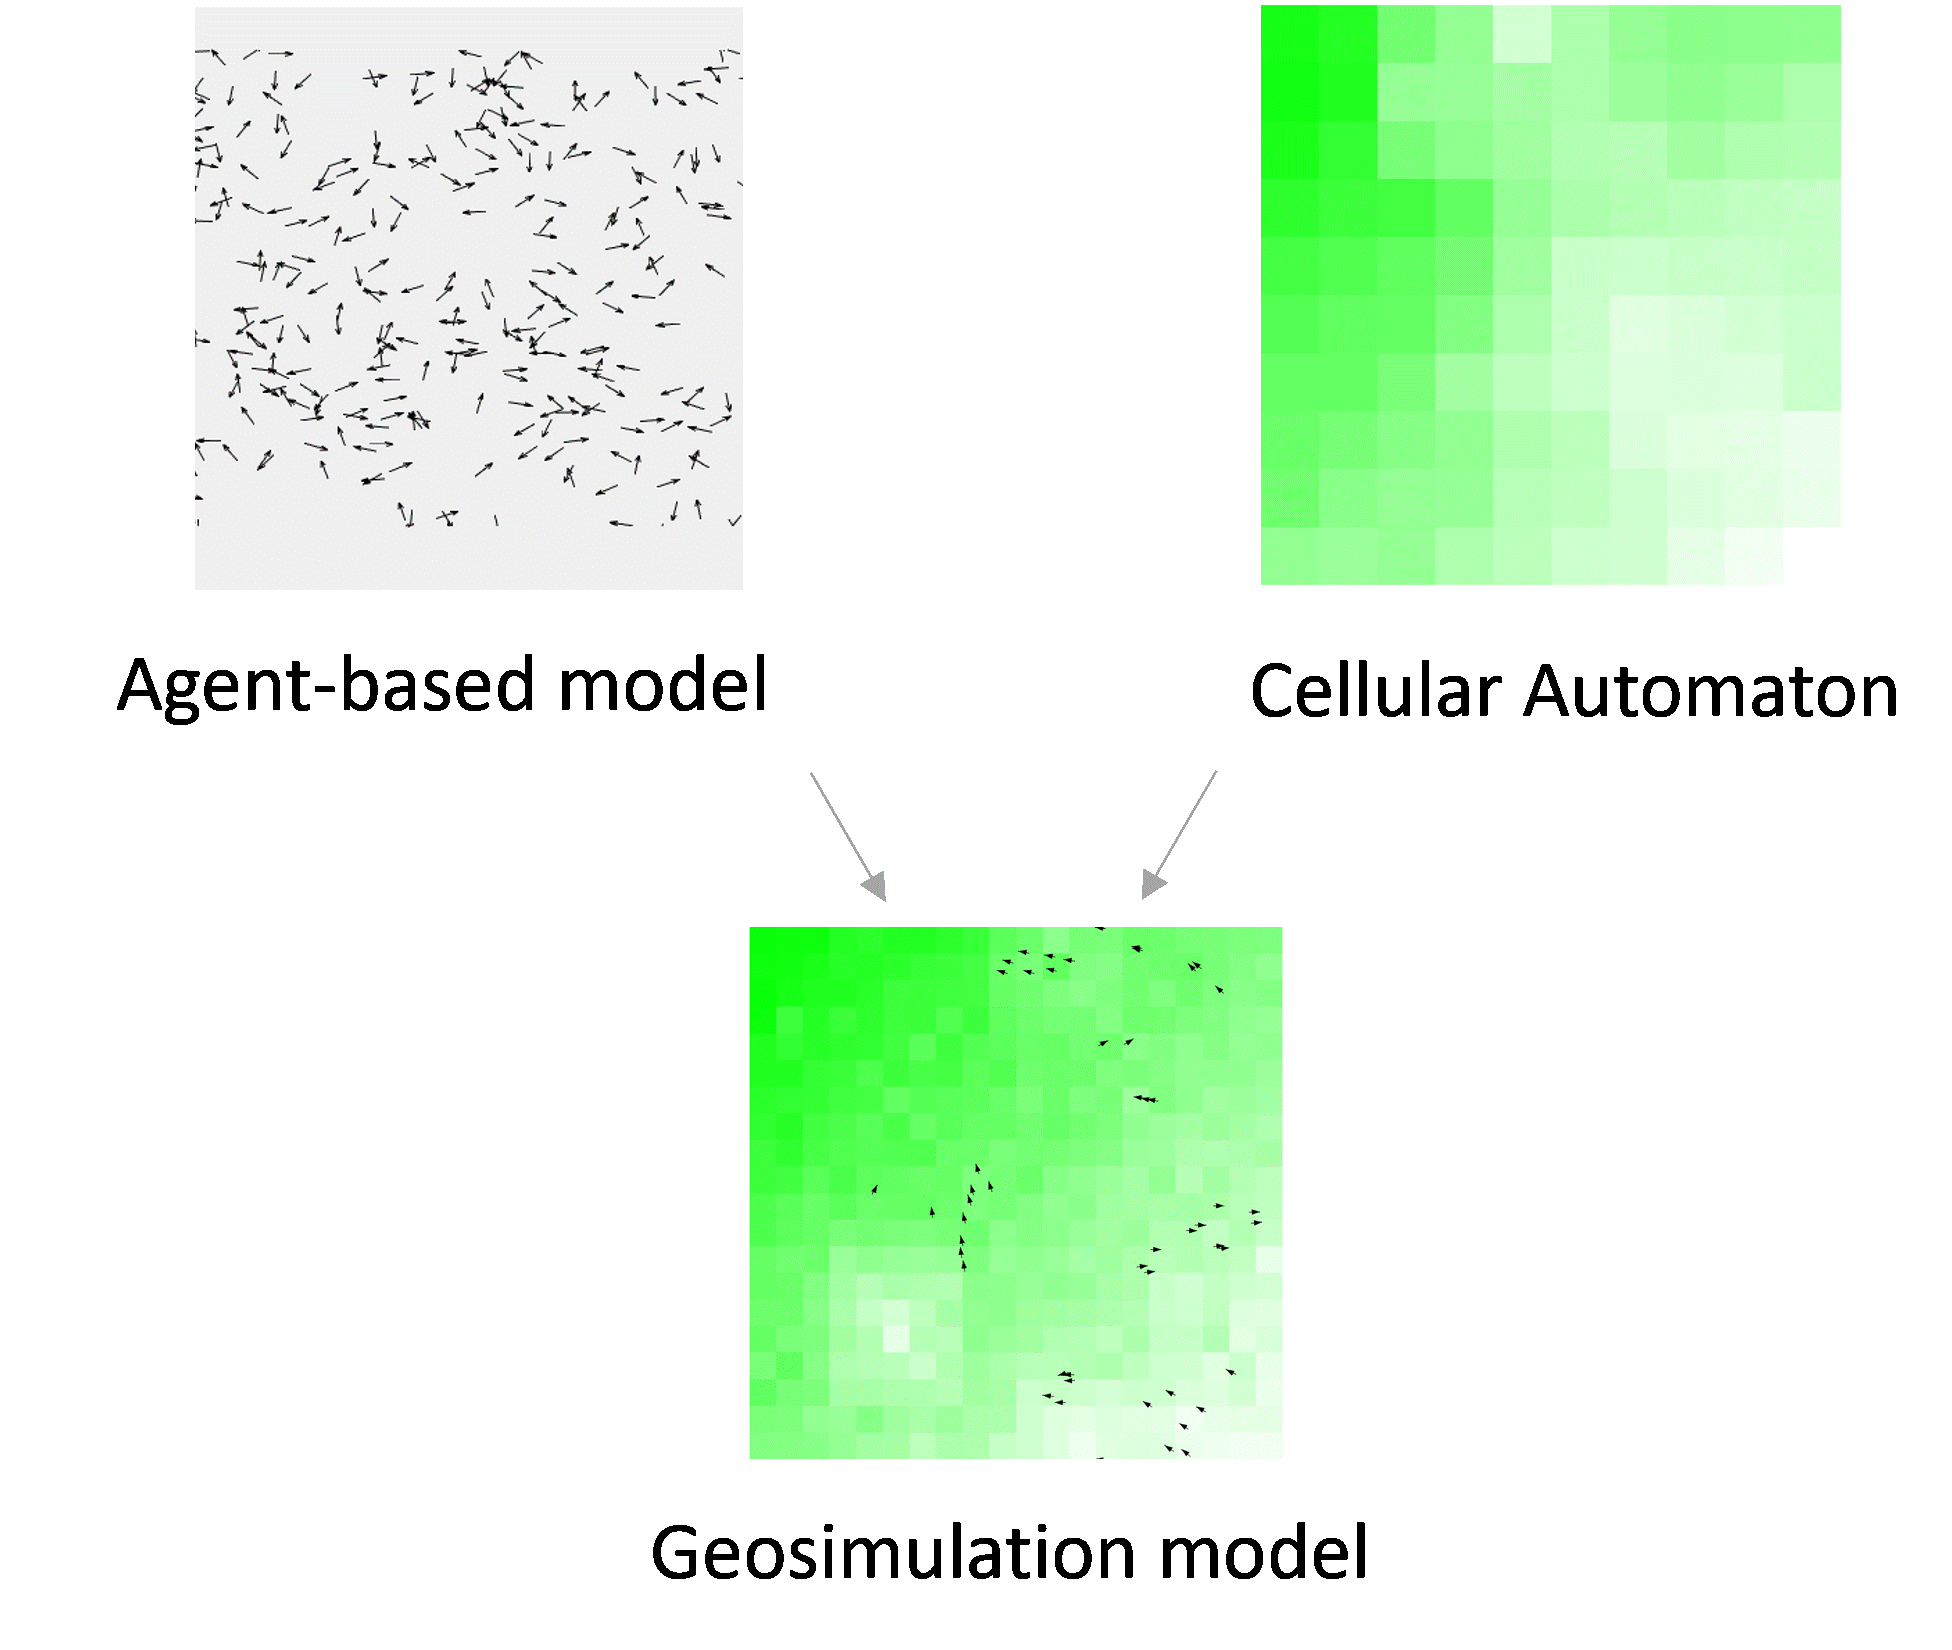 A geosimulation model often integrates Agent-based models with Cellular Automata to represent complex living systems.